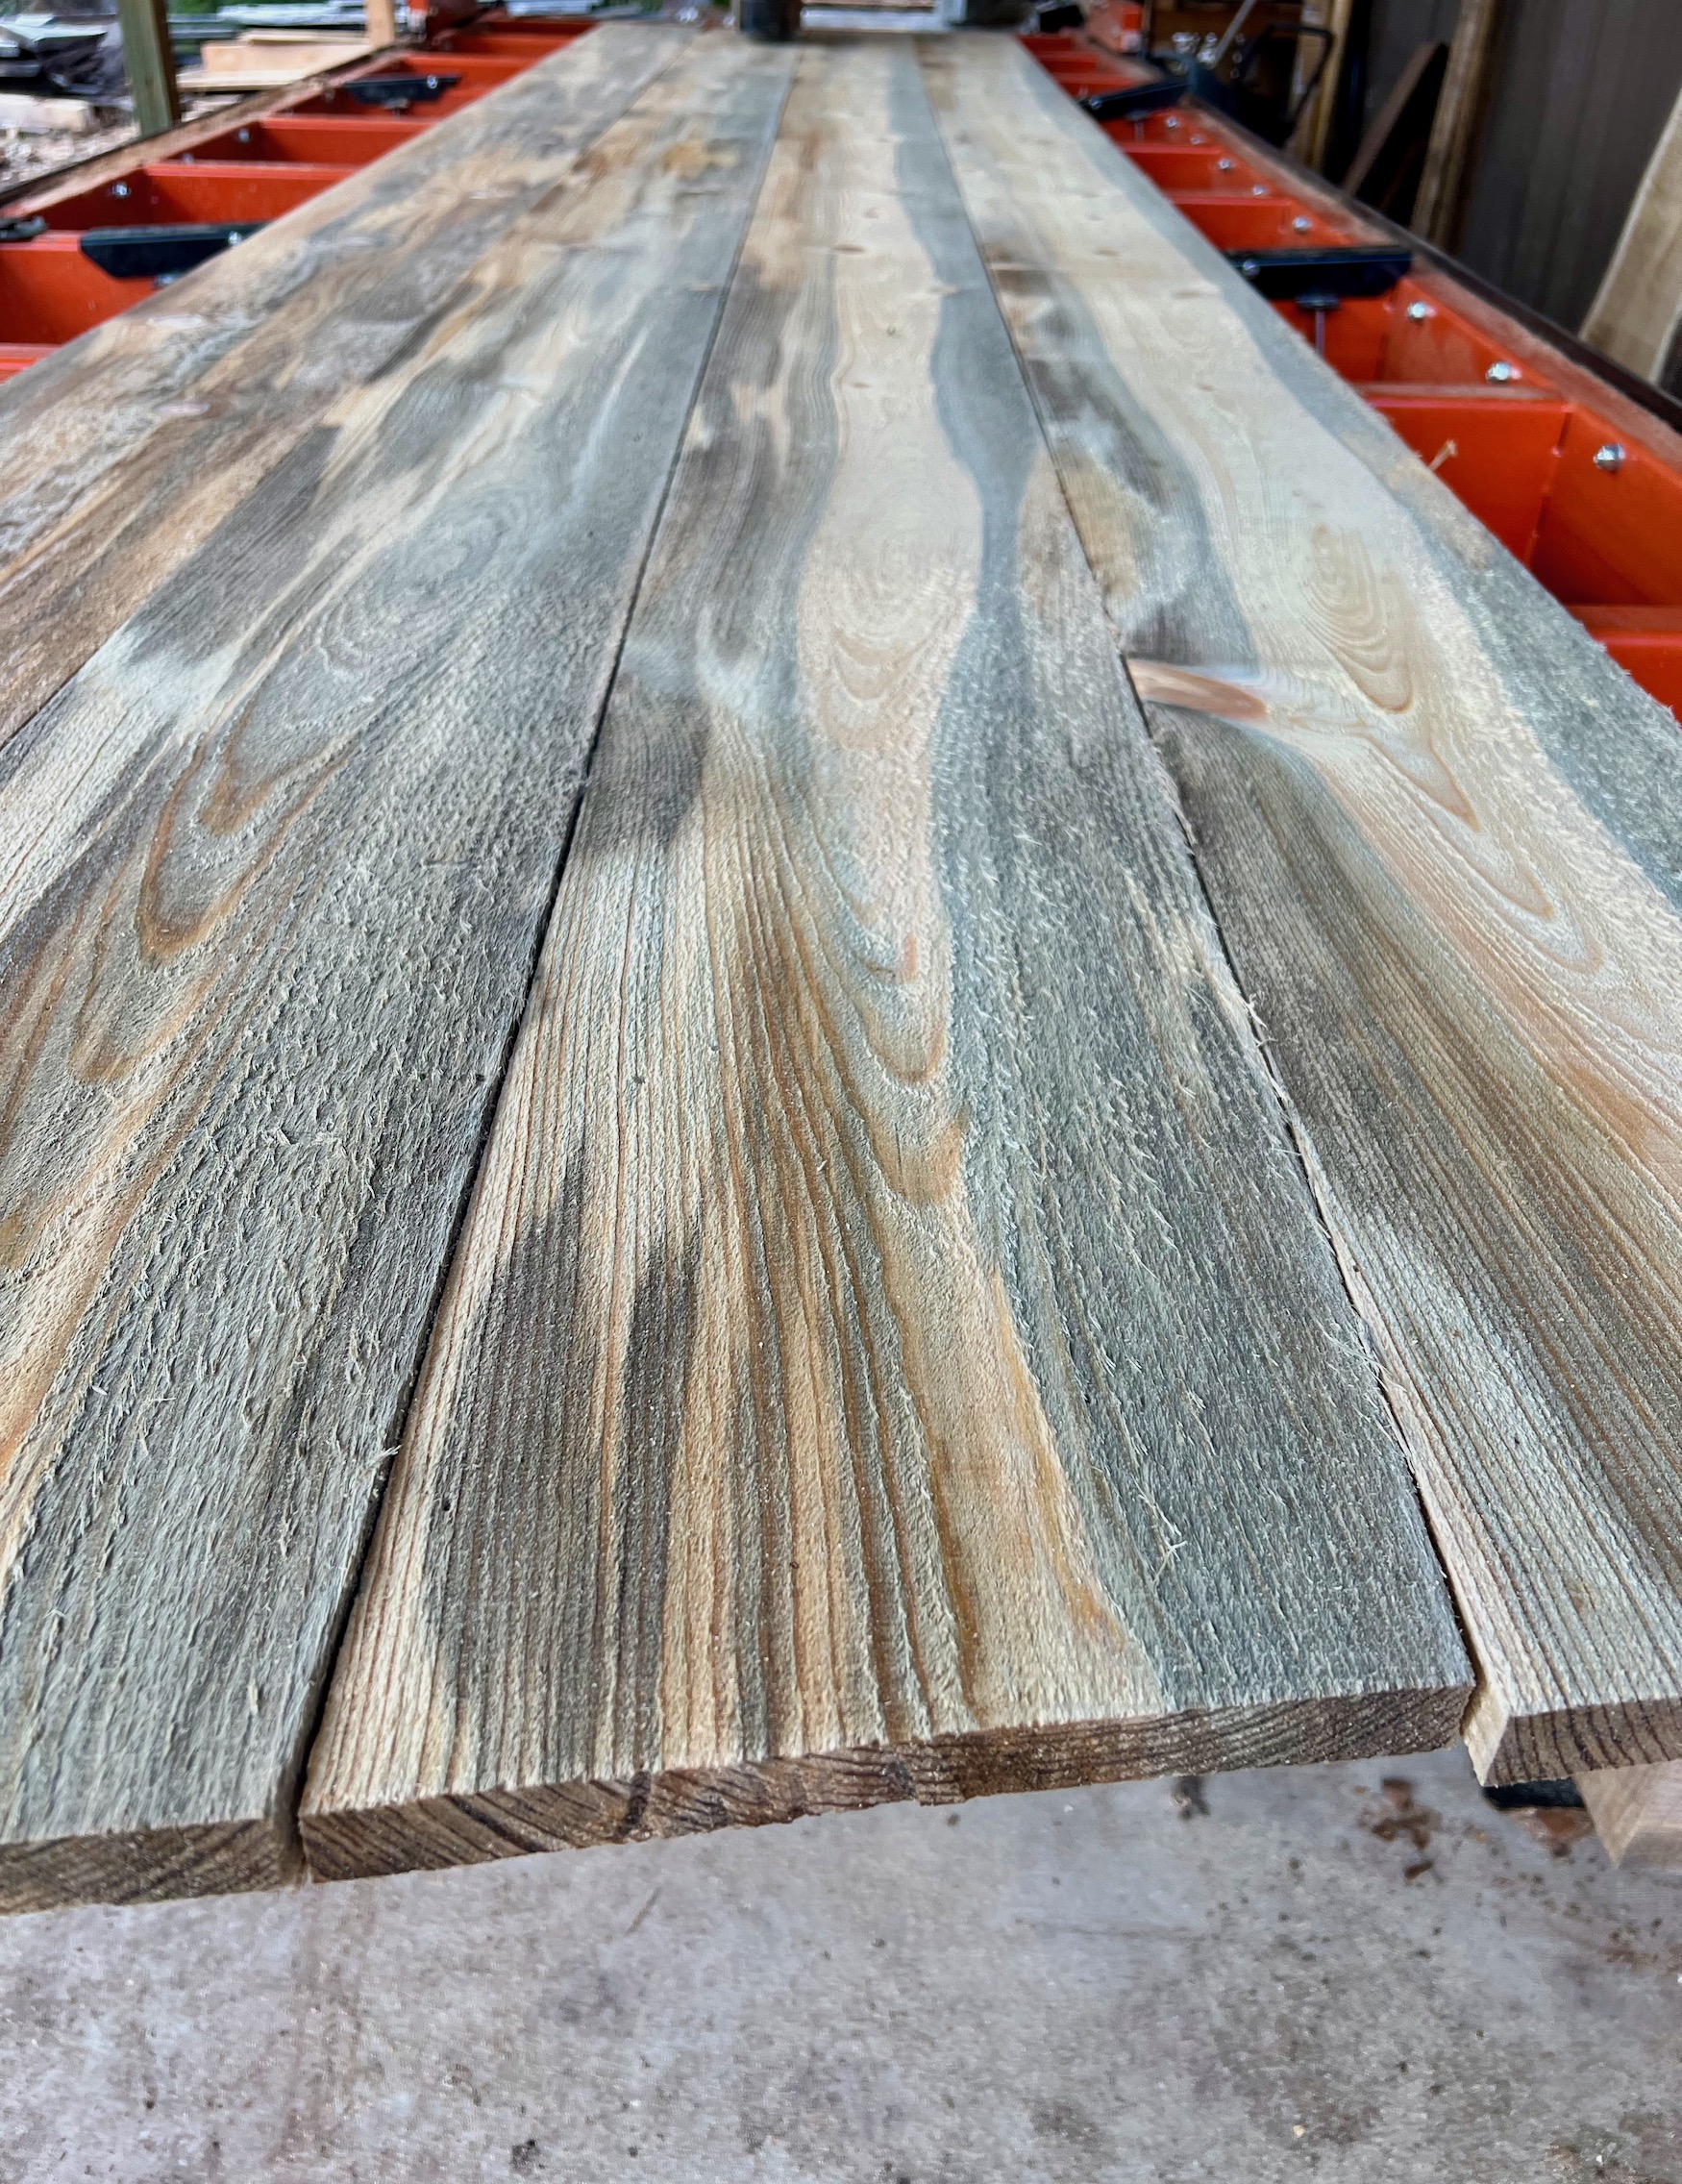 Blue Wood Stain